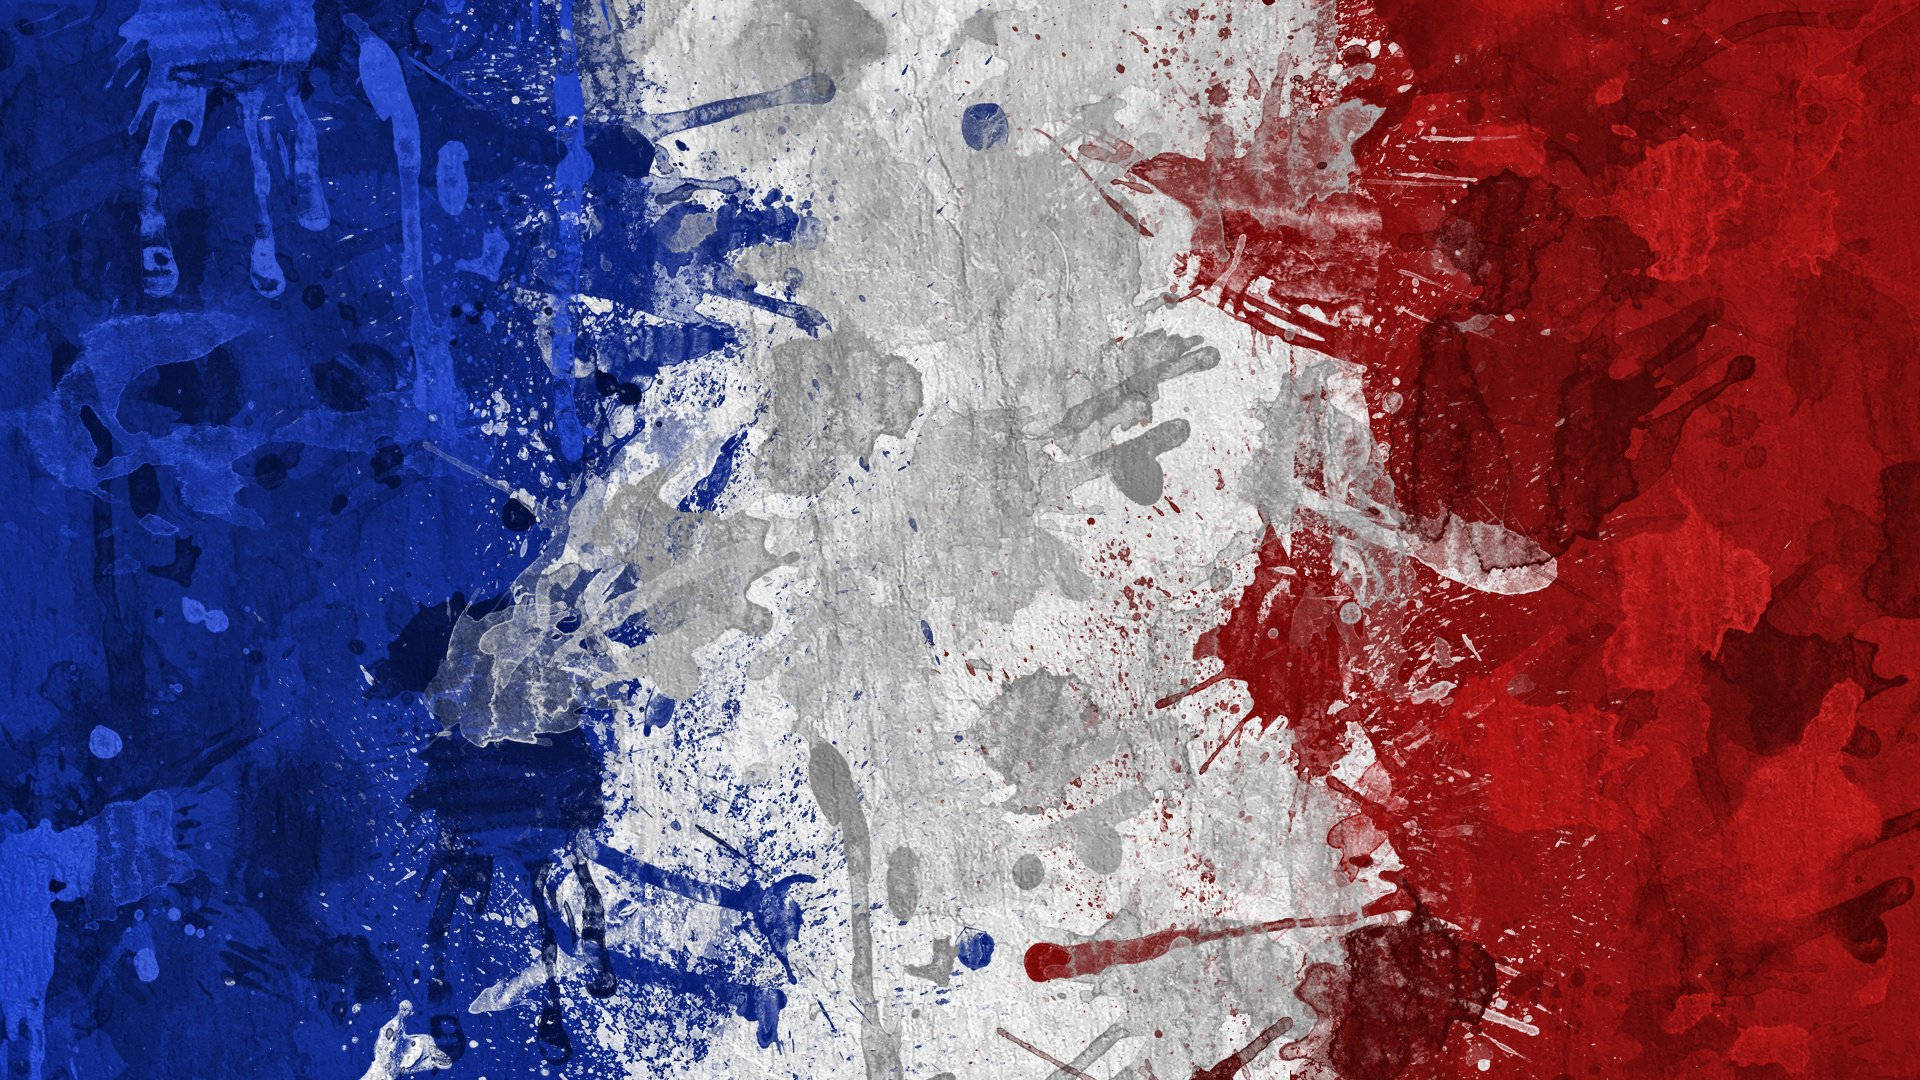 Artistic Representation of the French Flag Wallpaper